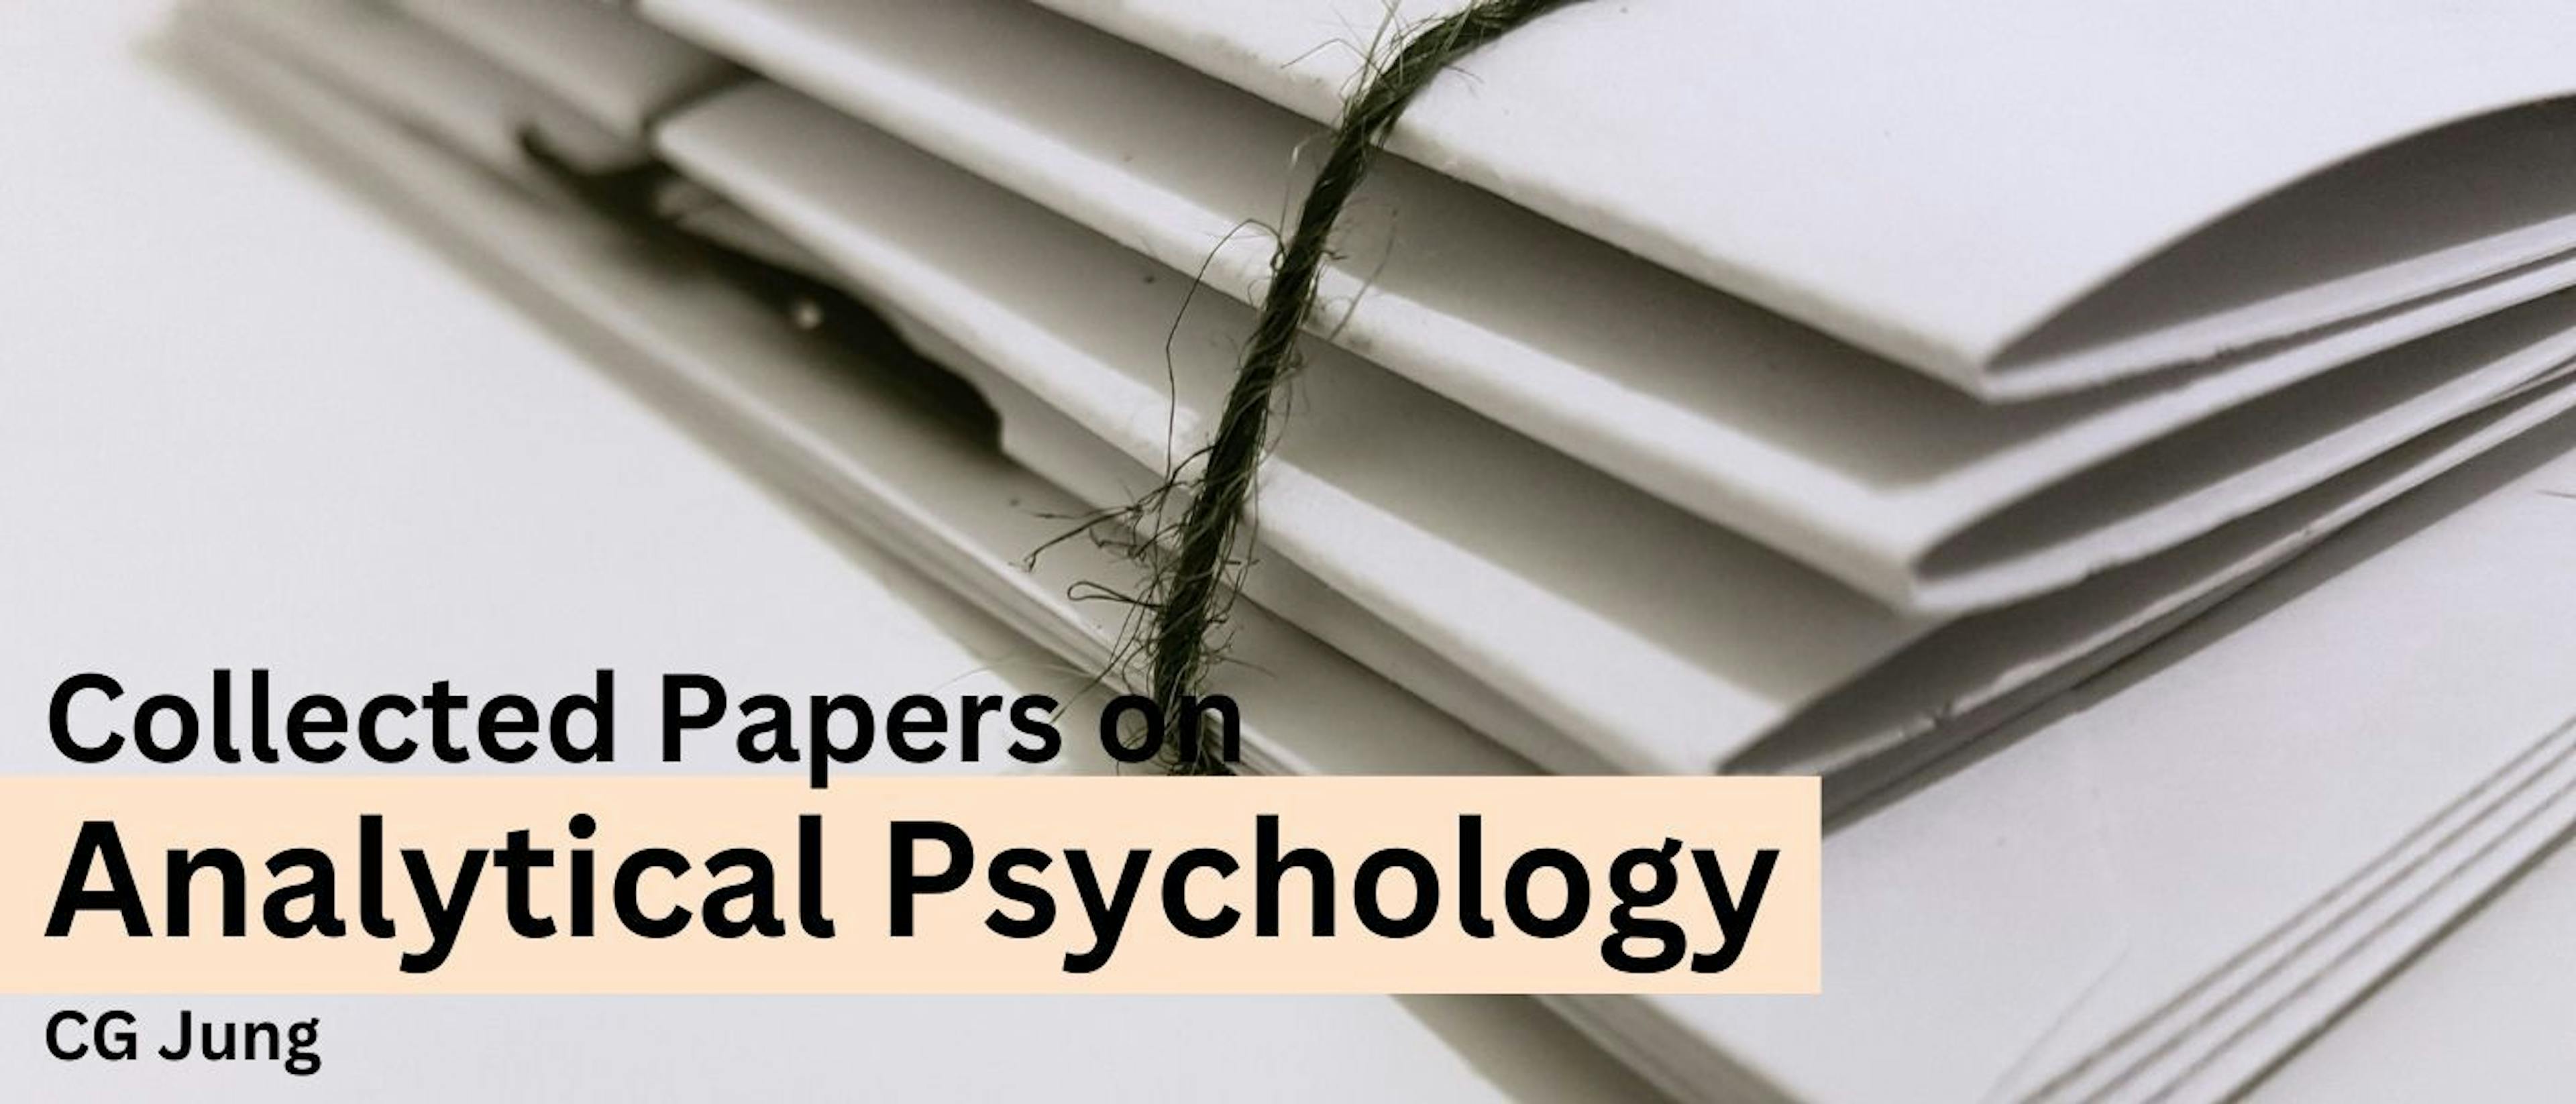 featured image - Collected Papers on Analytical Psychology by C. G. Jung - Table of Links